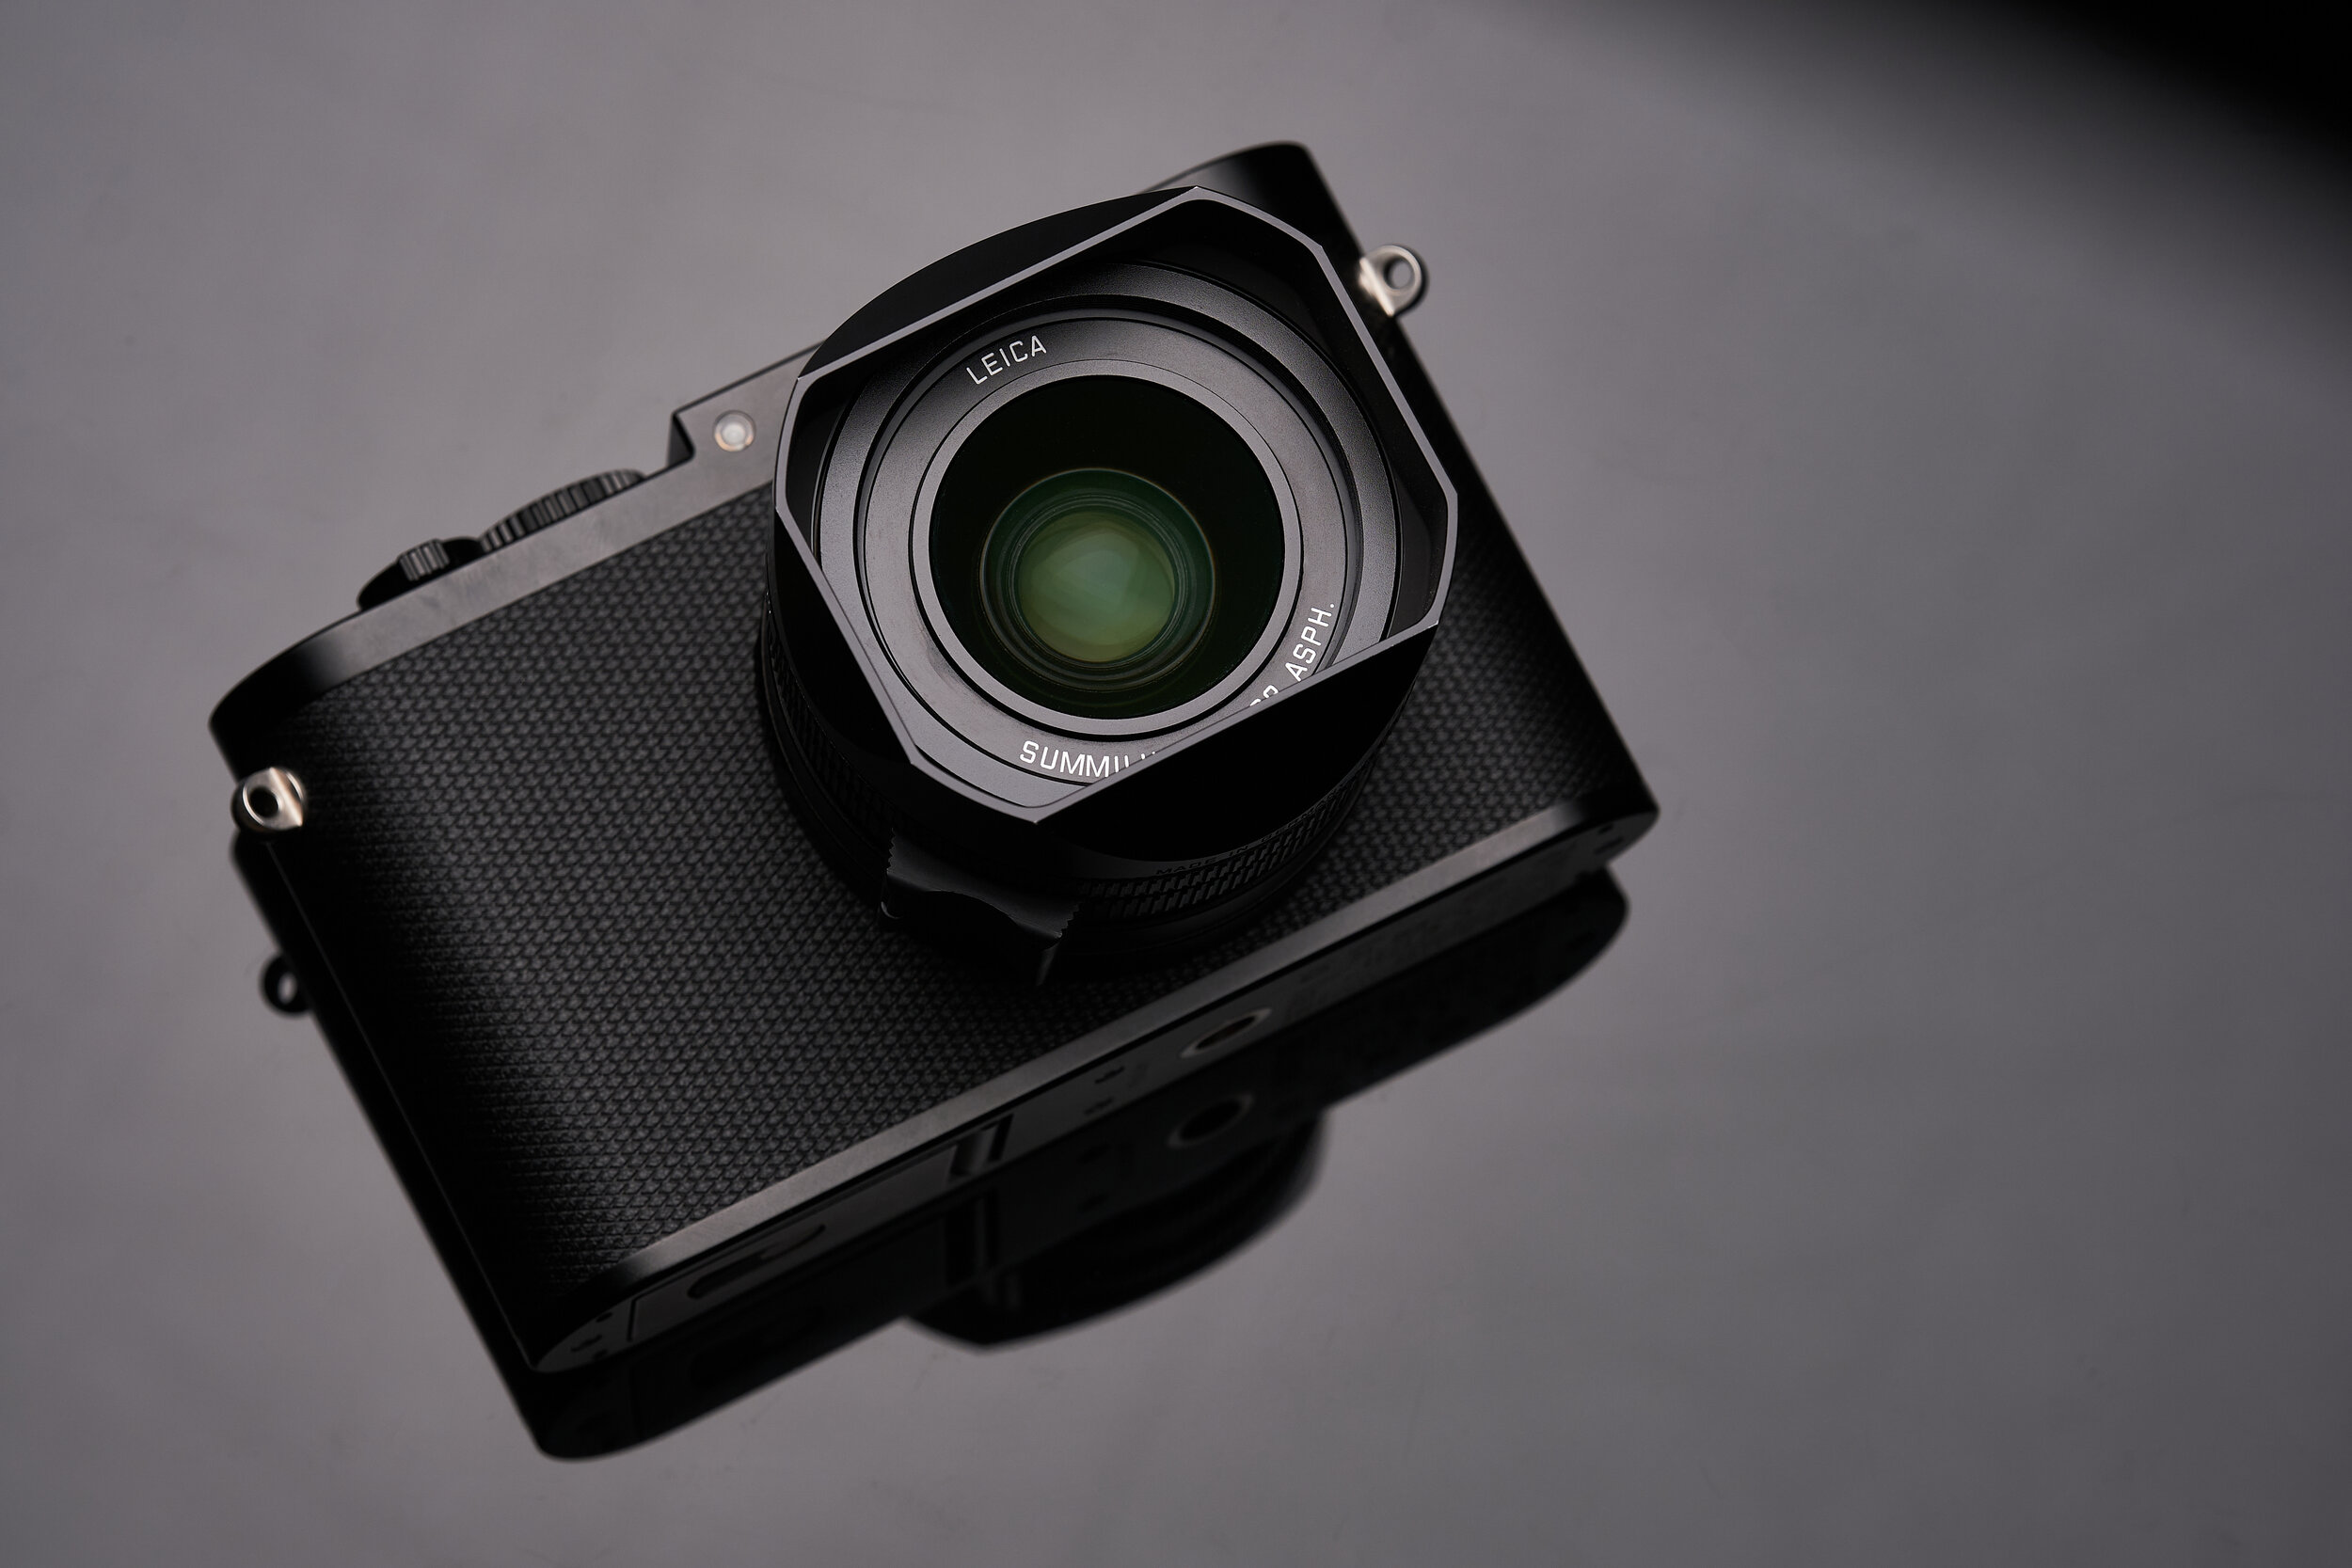 Review: The Leica Q (Typ 116) in 2022 — The Broketographers